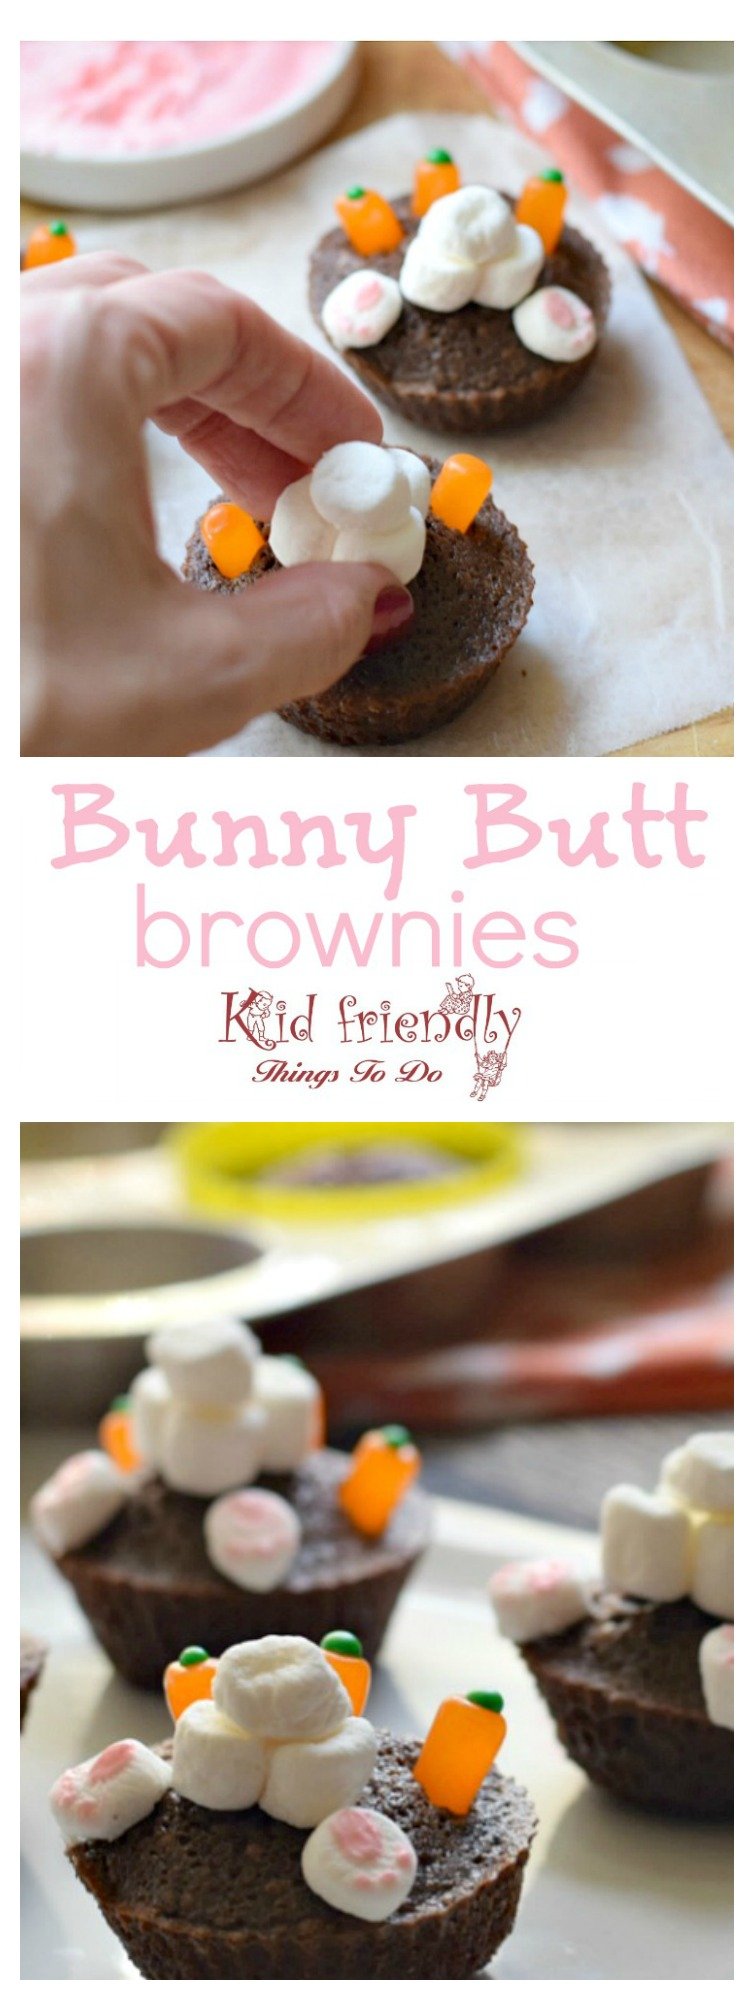 Bunny Butt Brownies! A cute and simple Easter dessert treat for kids and adults. www.kidfriendlythingstodo.com